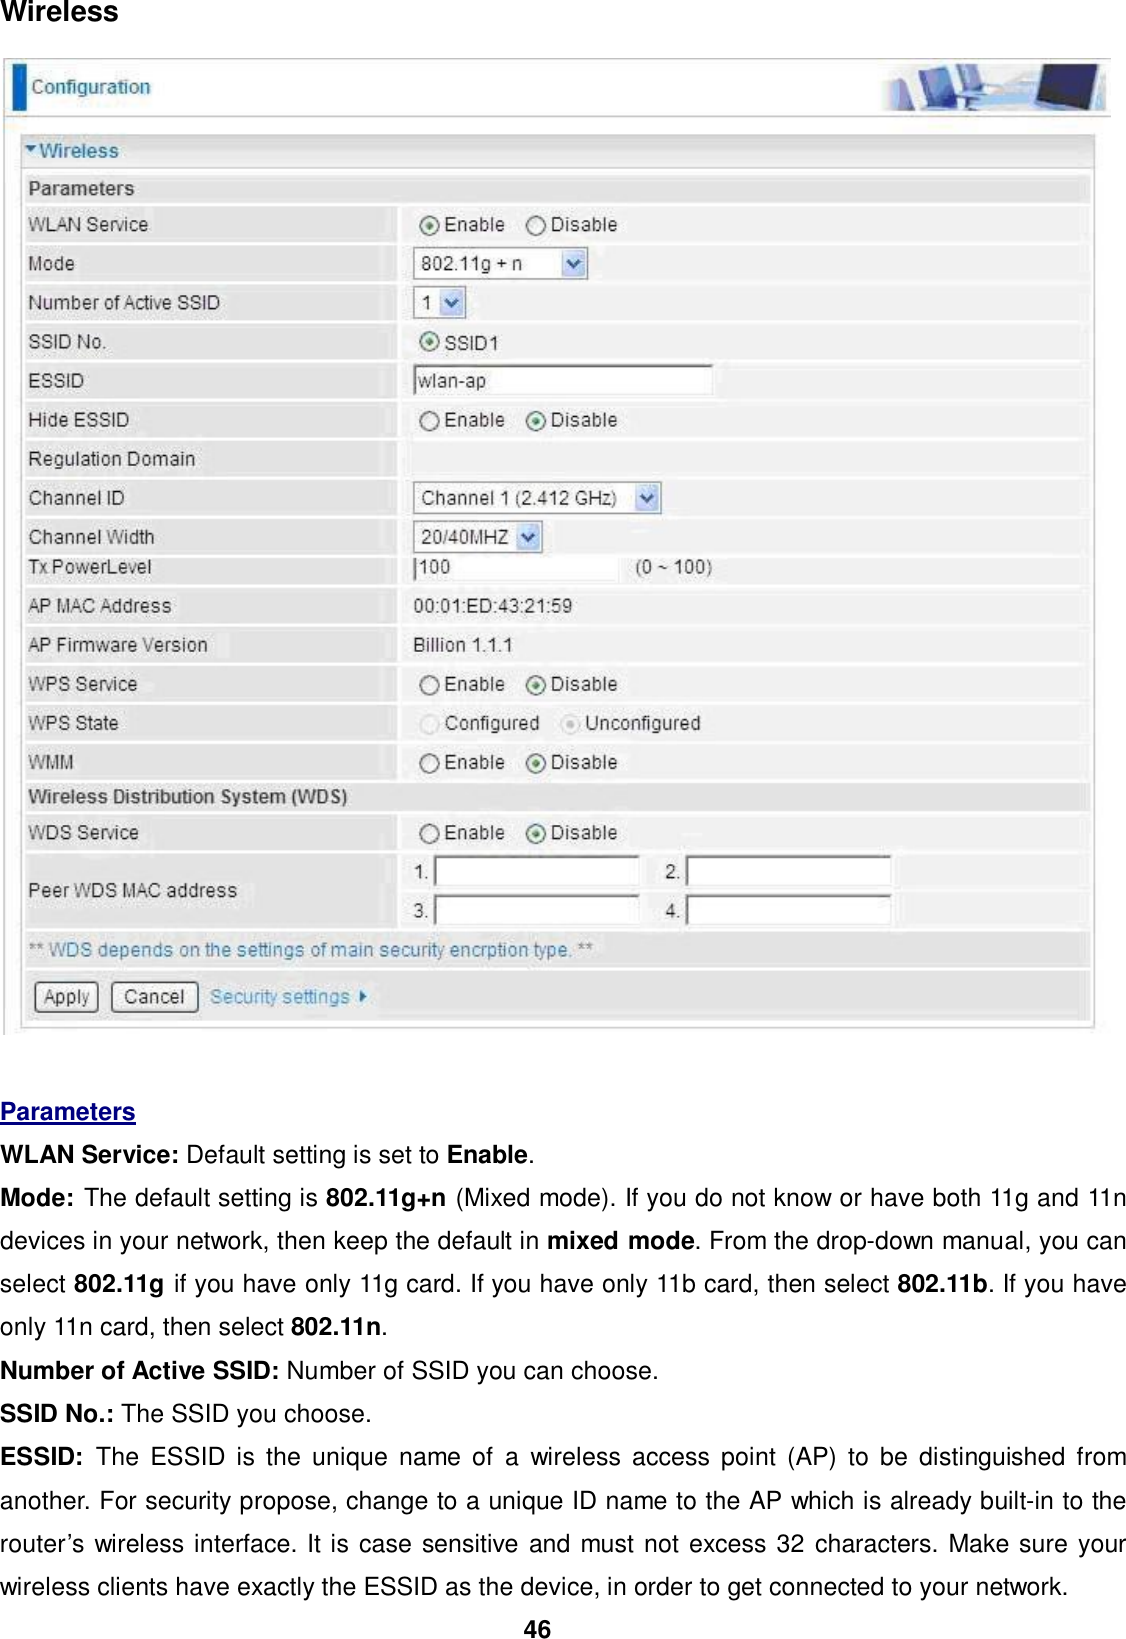 46  Wireless      Parameters  WLAN Service: Default setting is set to Enable.  Mode: The default setting is 802.11g+n (Mixed mode). If you do not know or have both 11g and 11n devices in your network, then keep the default in mixed mode. From the drop-down manual, you can select 802.11g if you have only 11g card. If you have only 11b card, then select 802.11b. If you have only 11n card, then select 802.11n. Number of Active SSID: Number of SSID you can choose.  SSID No.: The SSID you choose.  ESSID:  The ESSID is the unique name of a wireless access point (AP) to be distinguished from another. For security propose, change to a unique ID name to the AP which is already built-in to the router’s wireless interface. It is case sensitive and must not excess 32 characters. Make sure your wireless clients have exactly the ESSID as the device, in order to get connected to your network. 